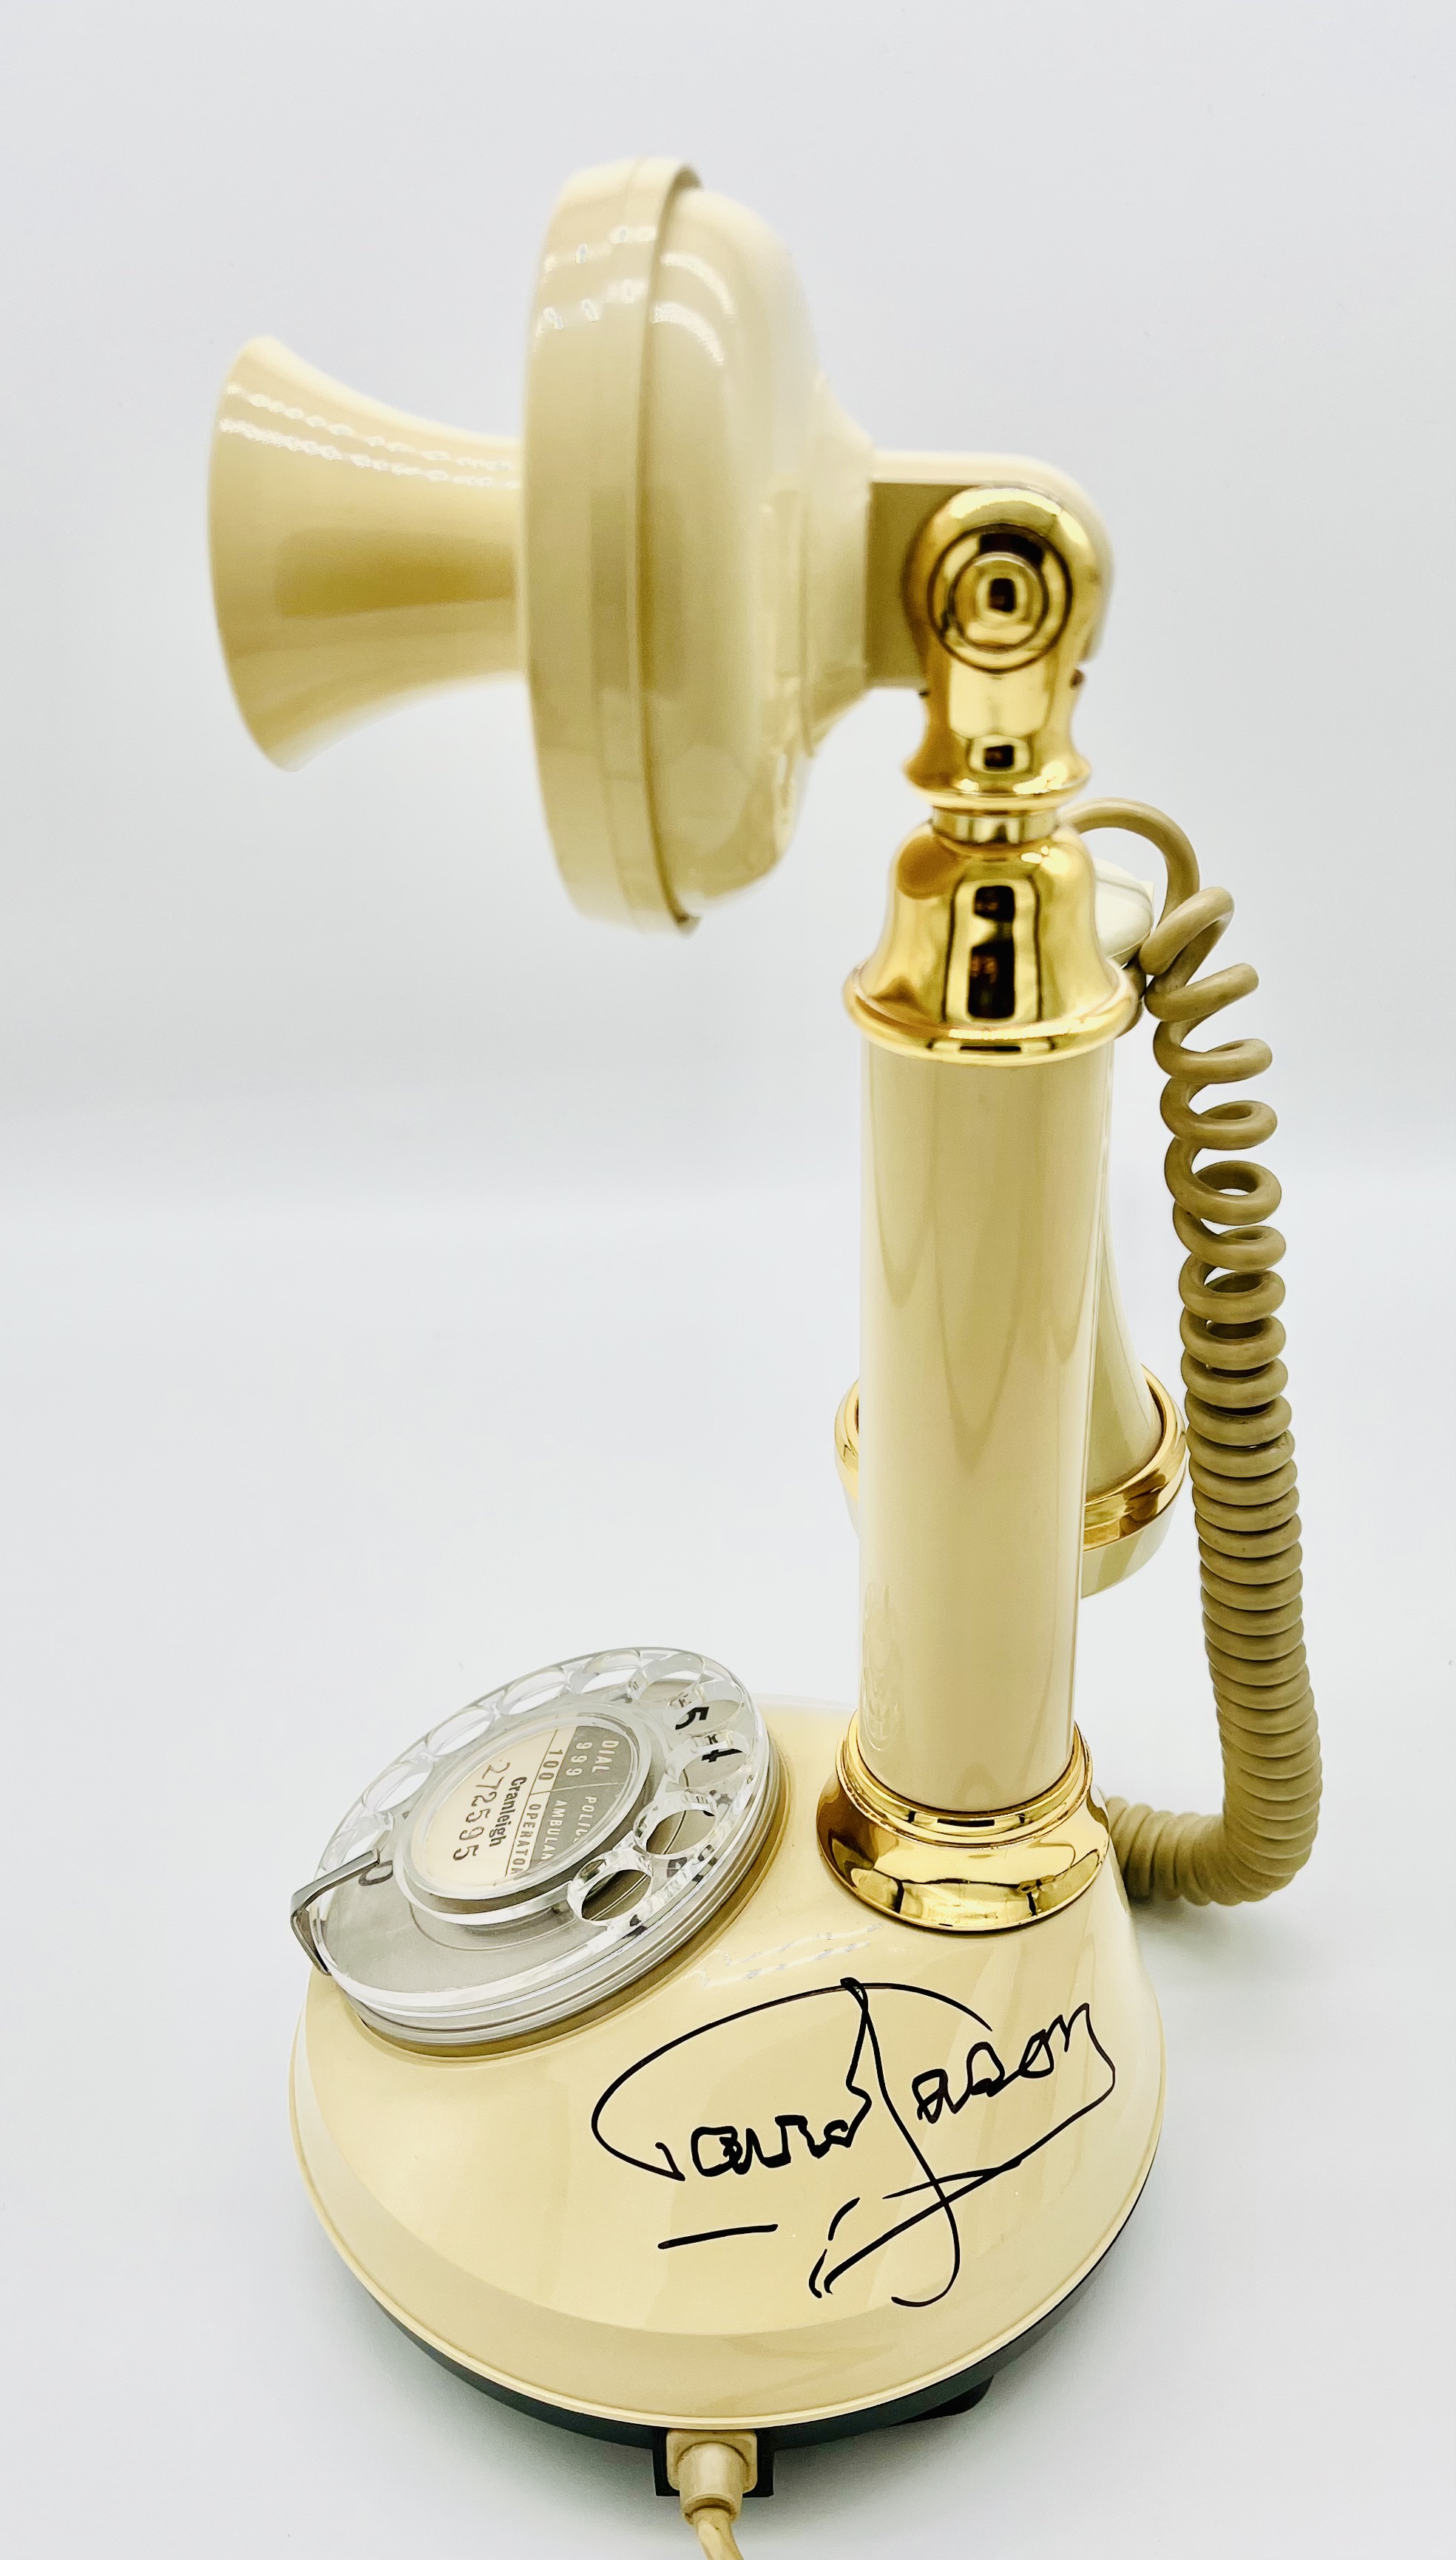 ONLY FOOLS & HORSES - DEL BOY'S CANDLESTICK TELEPHONE - Image 2 of 6